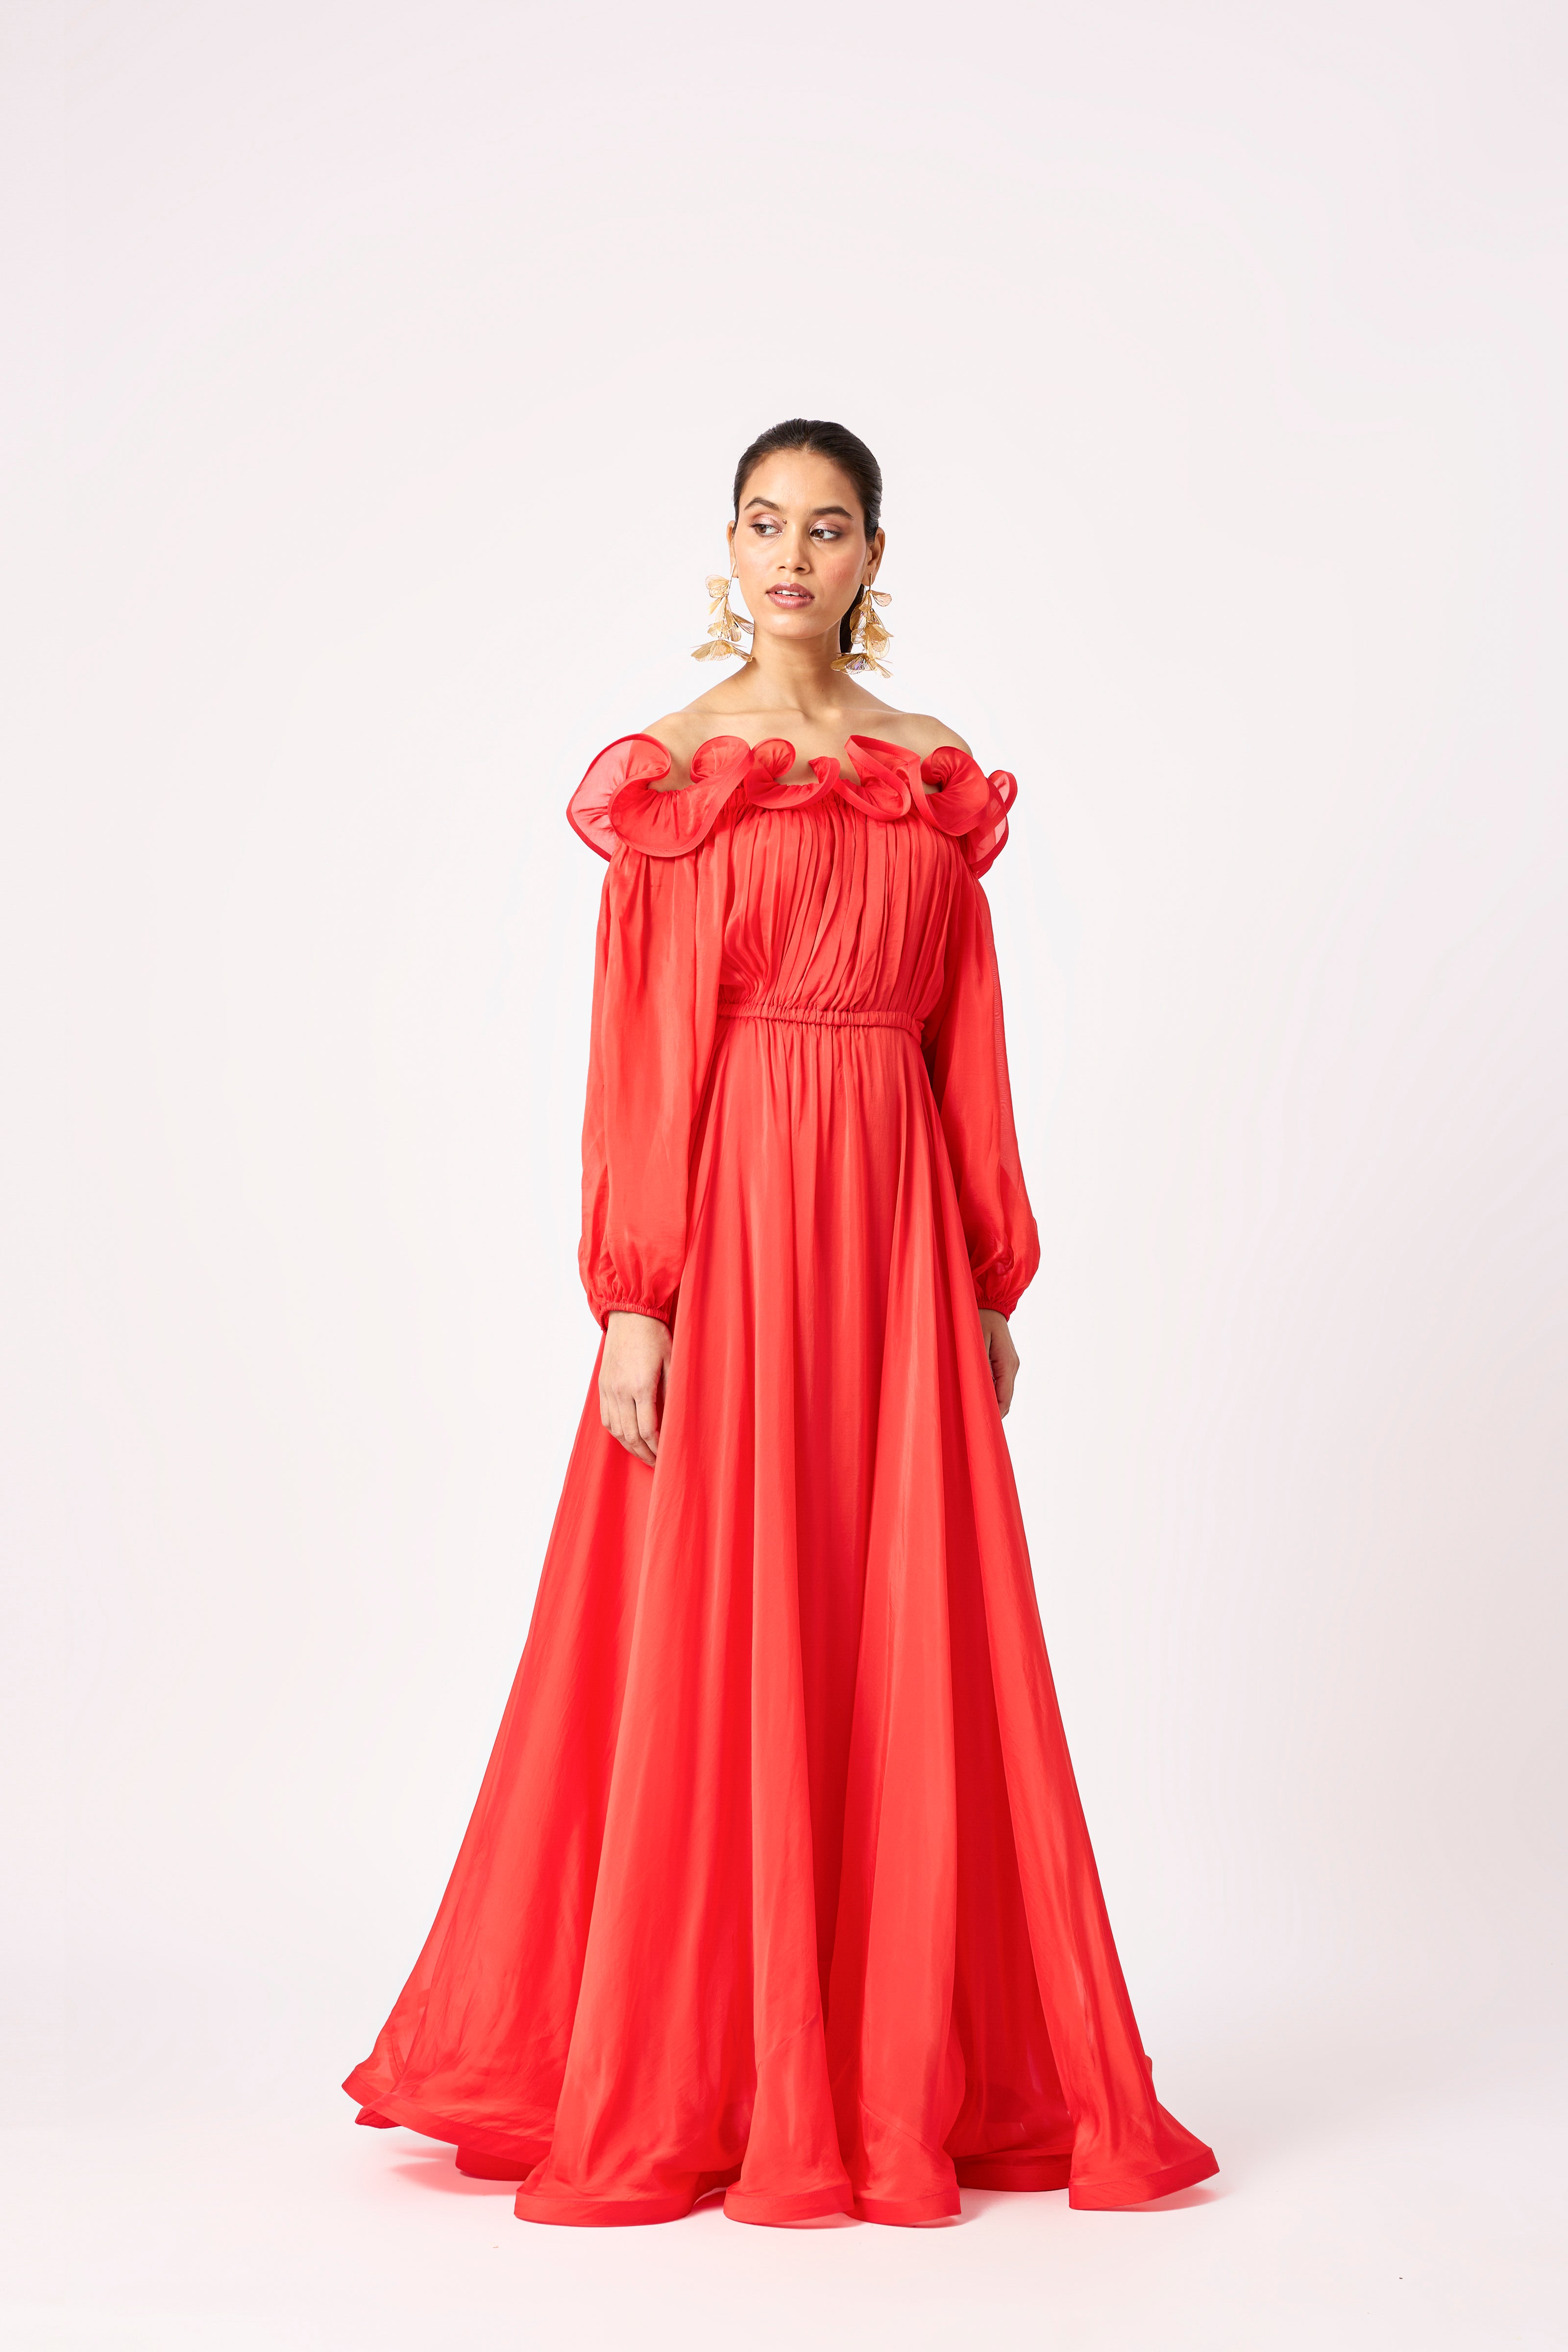 Madeline Organza Maxi - Scarlet Red